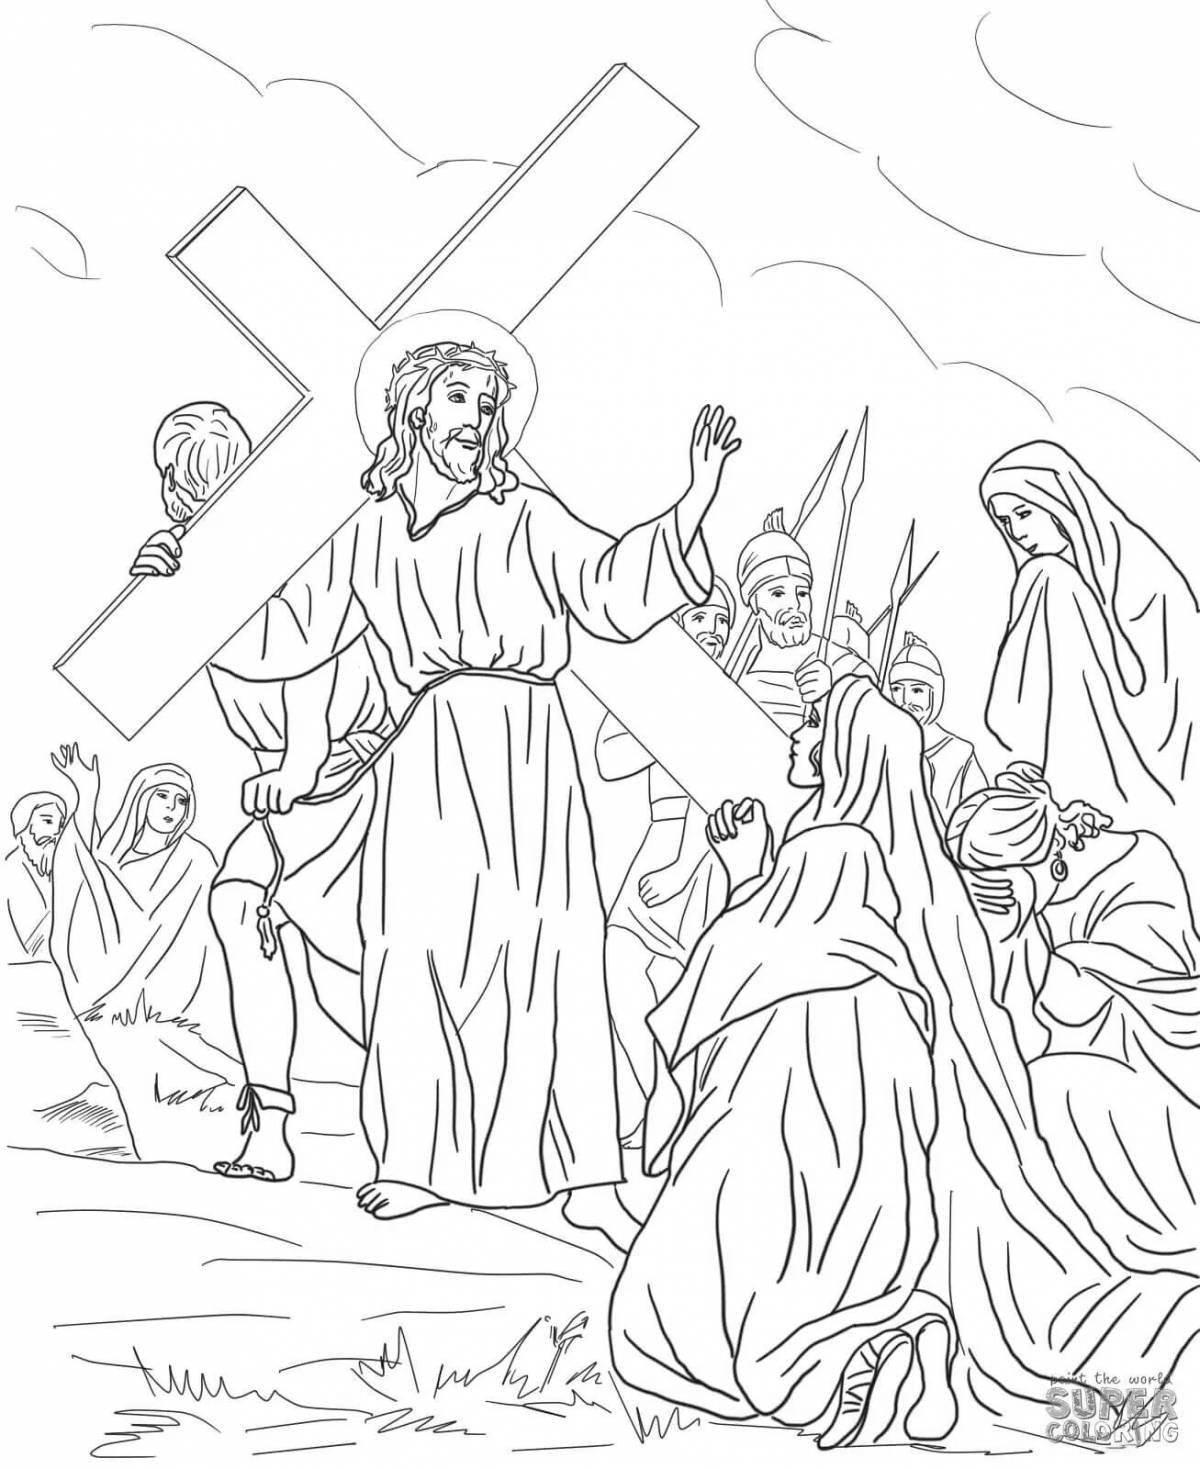 Colouring the living jesus christ